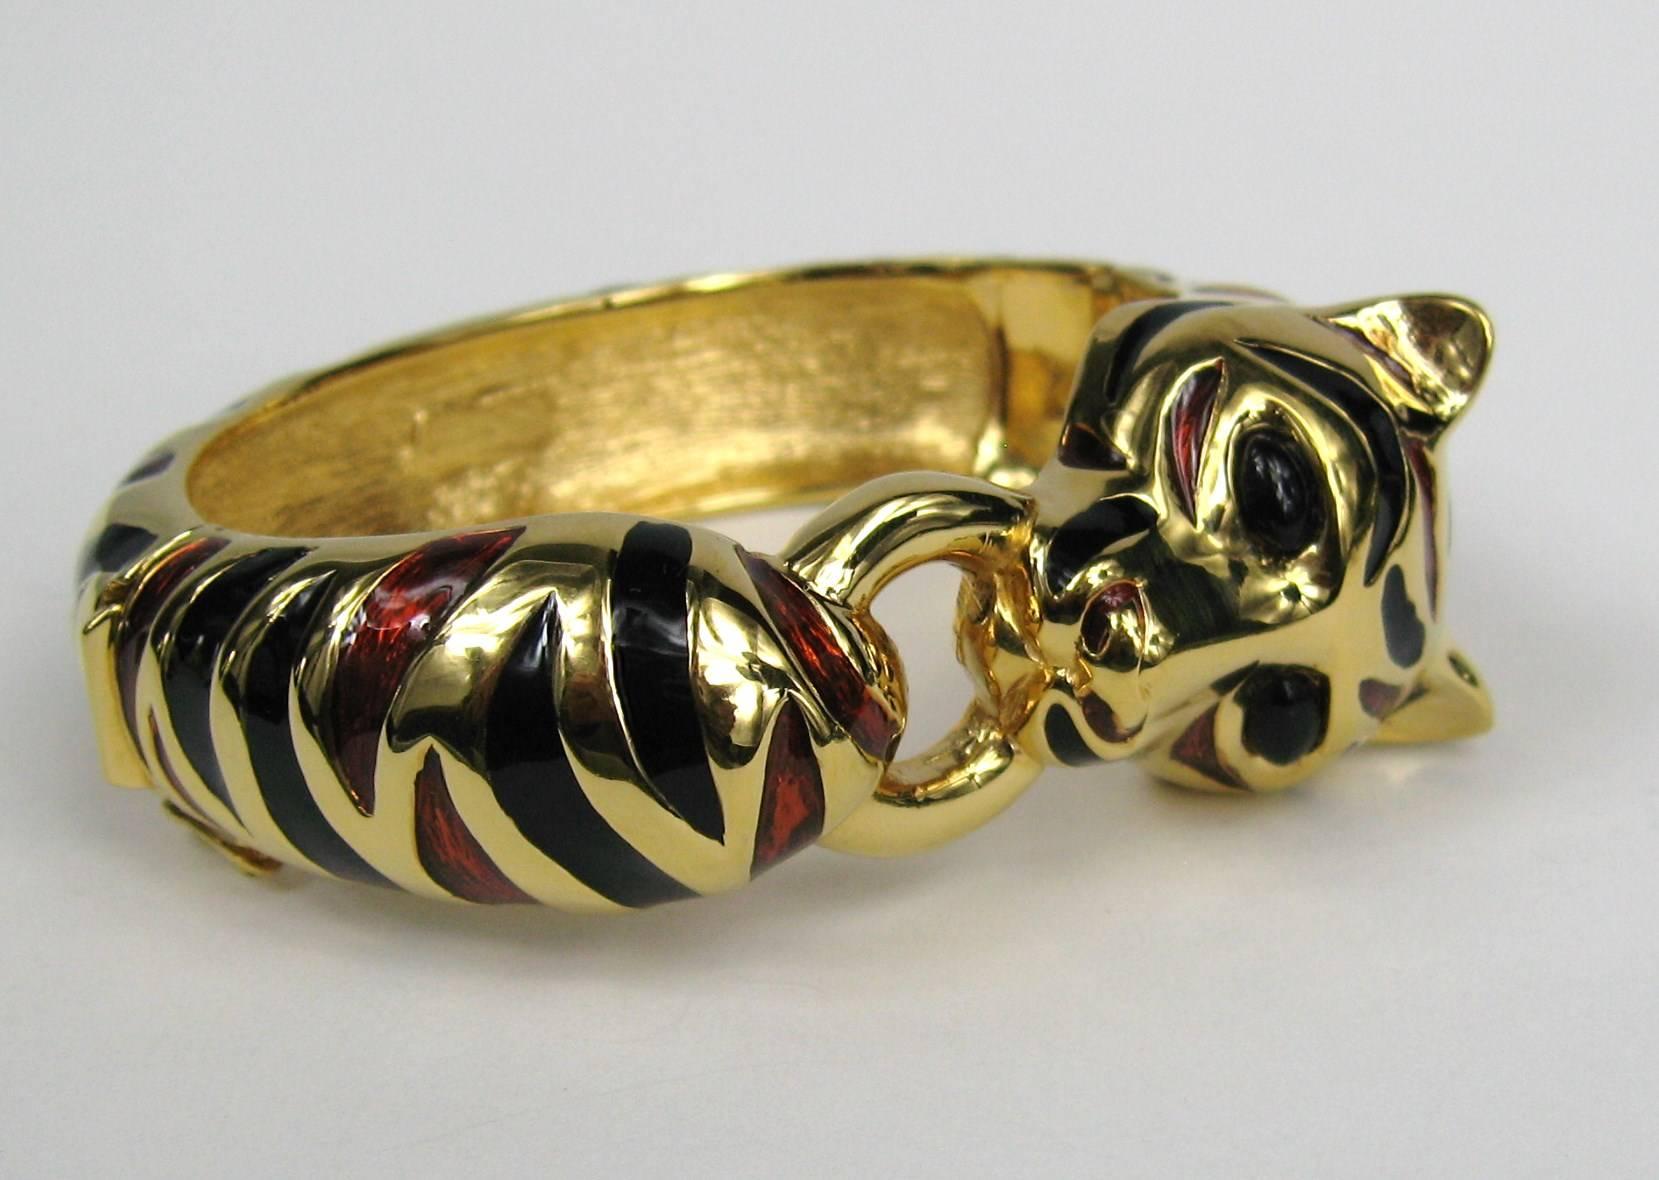 Another Fantastic Ciner Bracelet. Bracelet is enameled over Gilt Gold, hinged closure. Neiman Marcus and Ciner tags still attached. Never worn. Measures 2.5 in top to bottom x 3 inches wide Will fit a 6-7 inch wrist. Visit our storefront for